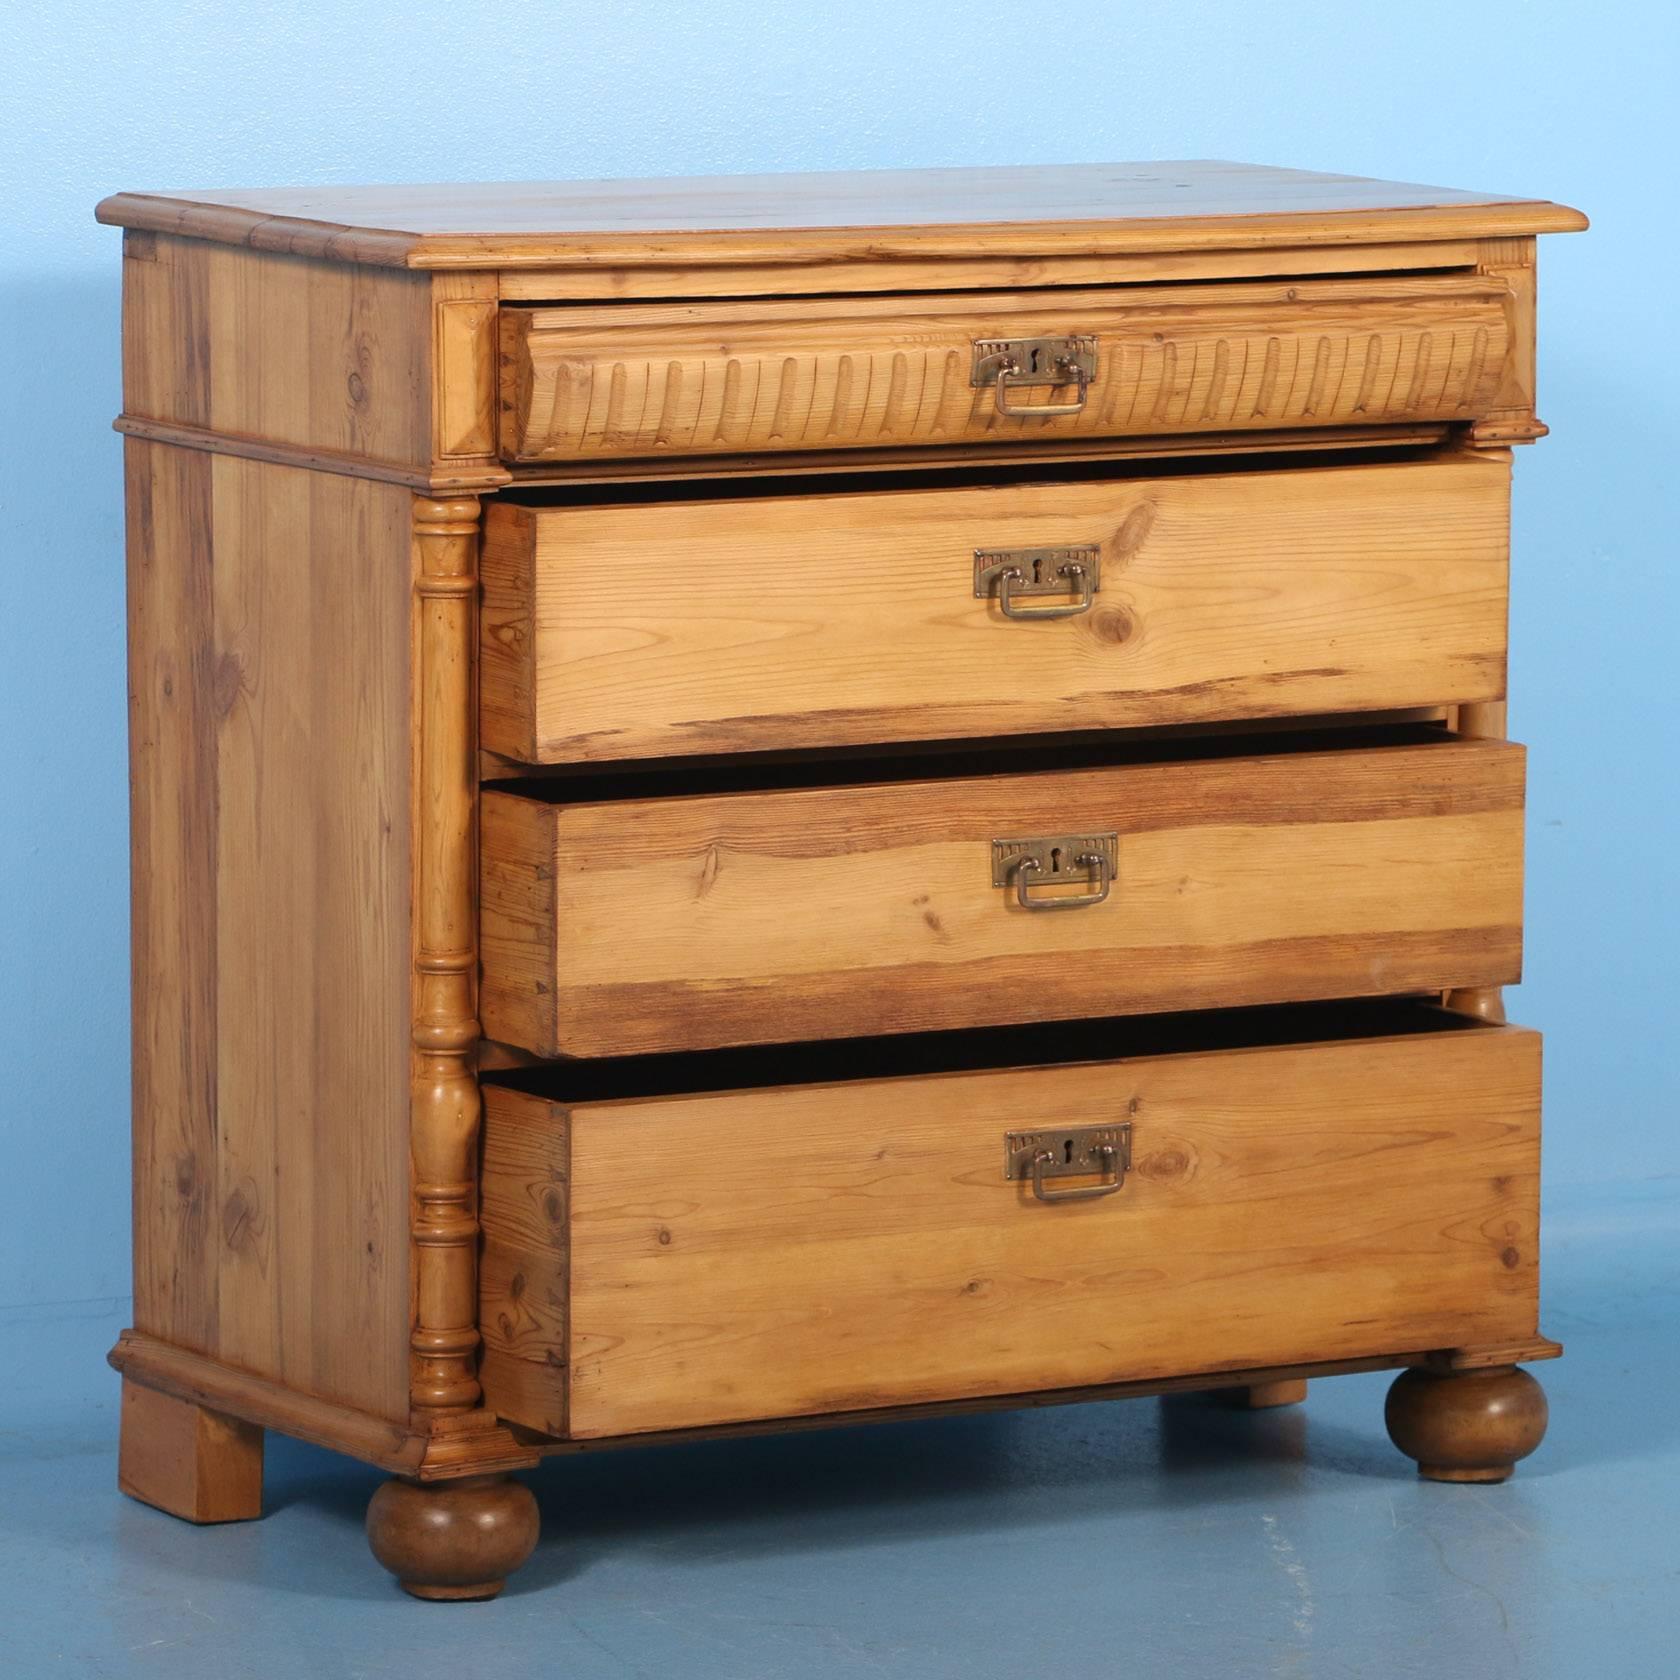 This lovely pine Chest of Drawers has been given  a wax finish to bring out the warmth of the wood. The dentil molding along the top drawer and decorative half columns along the sides were often used as style elements in Danish chests from this